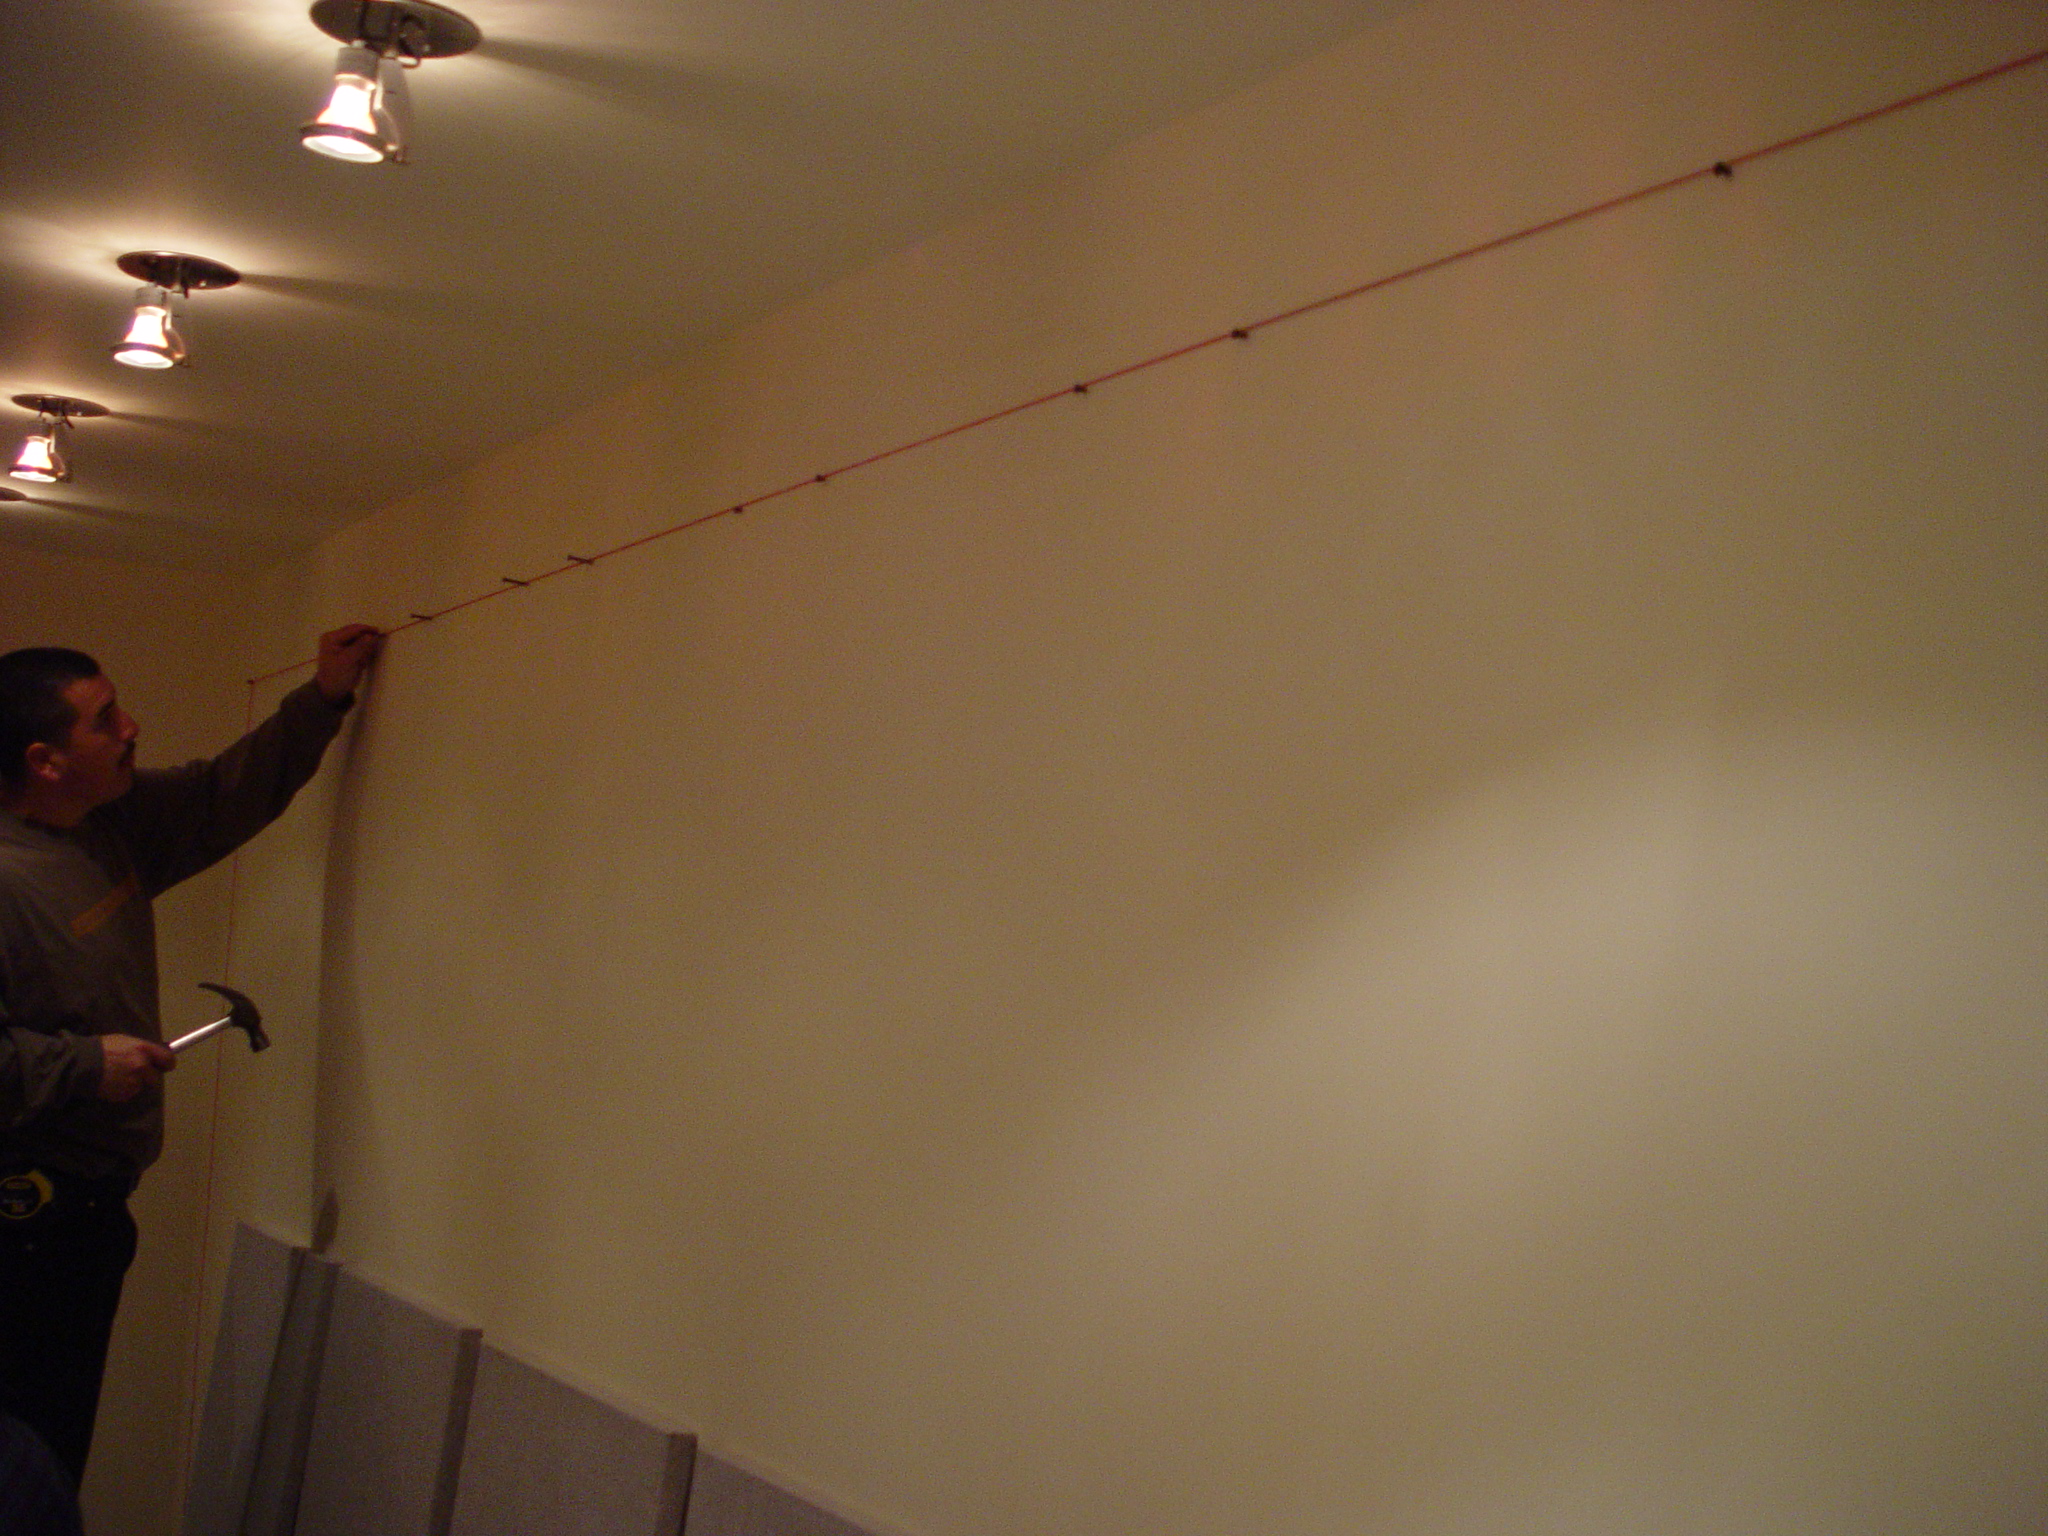 Fabric Panel Installation, Step 1 - String Level Guide